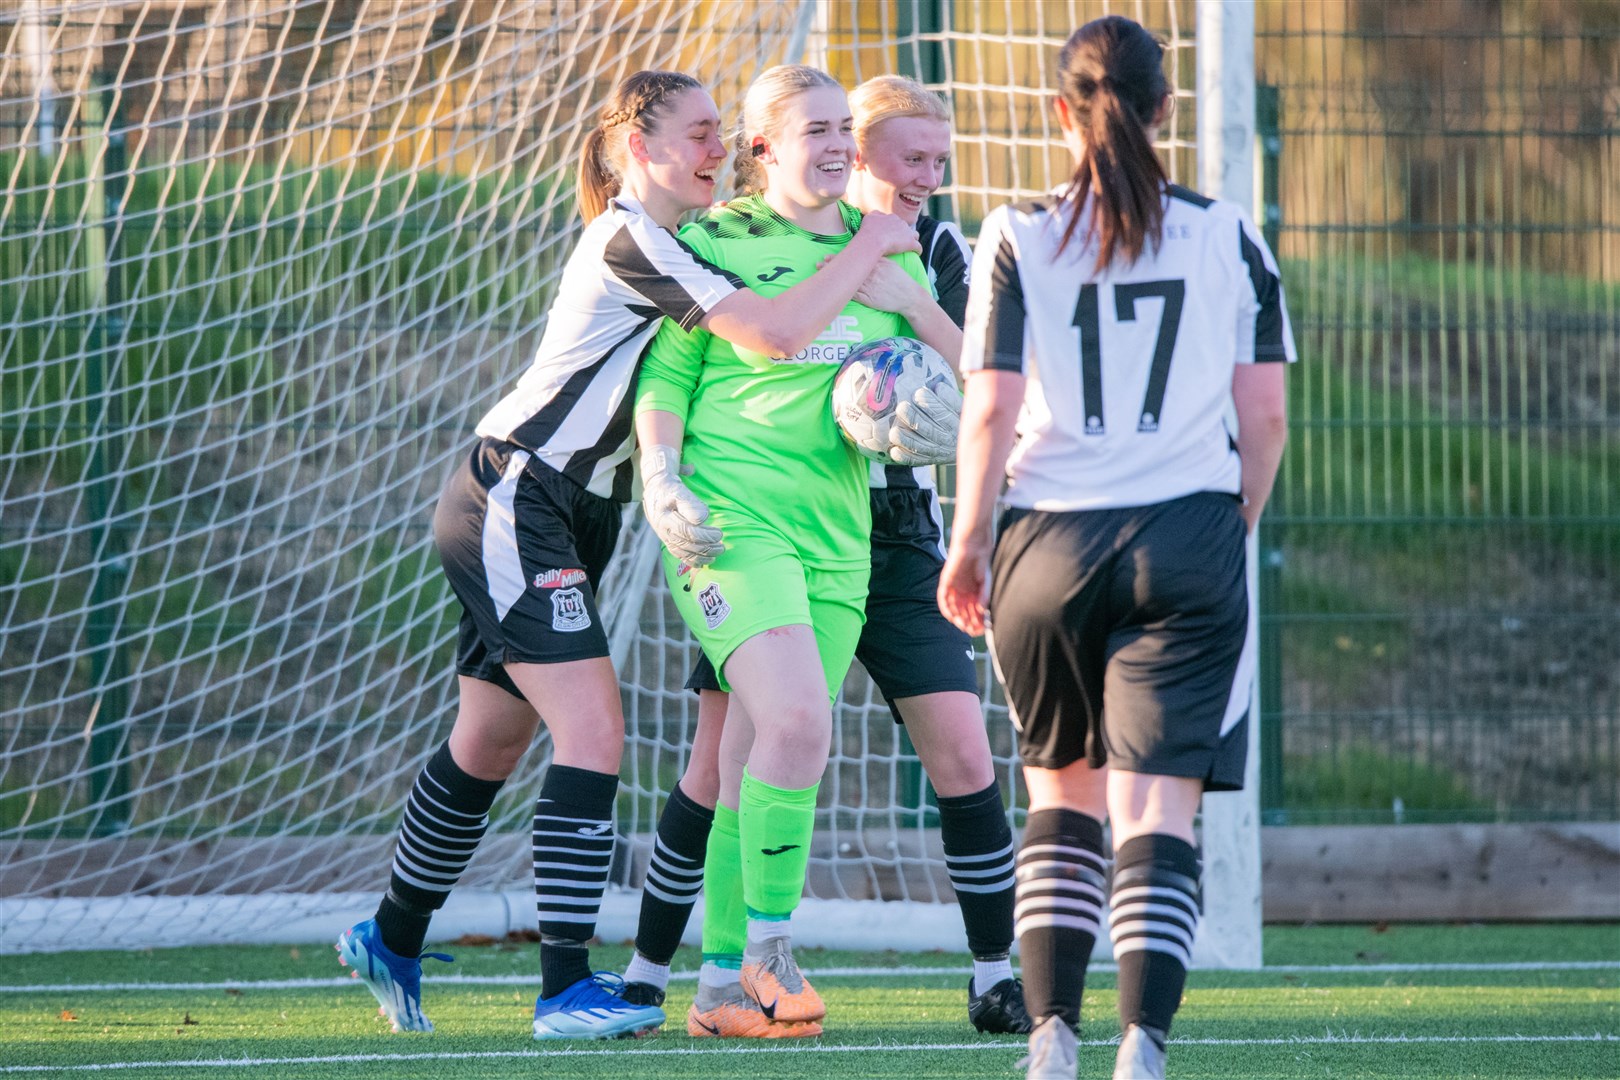 Elgin goalkeeper Maizy Mcafee celebrates with her team mates after she saved a first half penalty...Elgin City FC Women (5) vs Arbroath FC Women (2) - SWFL North League 23/24 - Gleaner Arena, Elgin 05/11/2023...Picture: Daniel Forsyth..